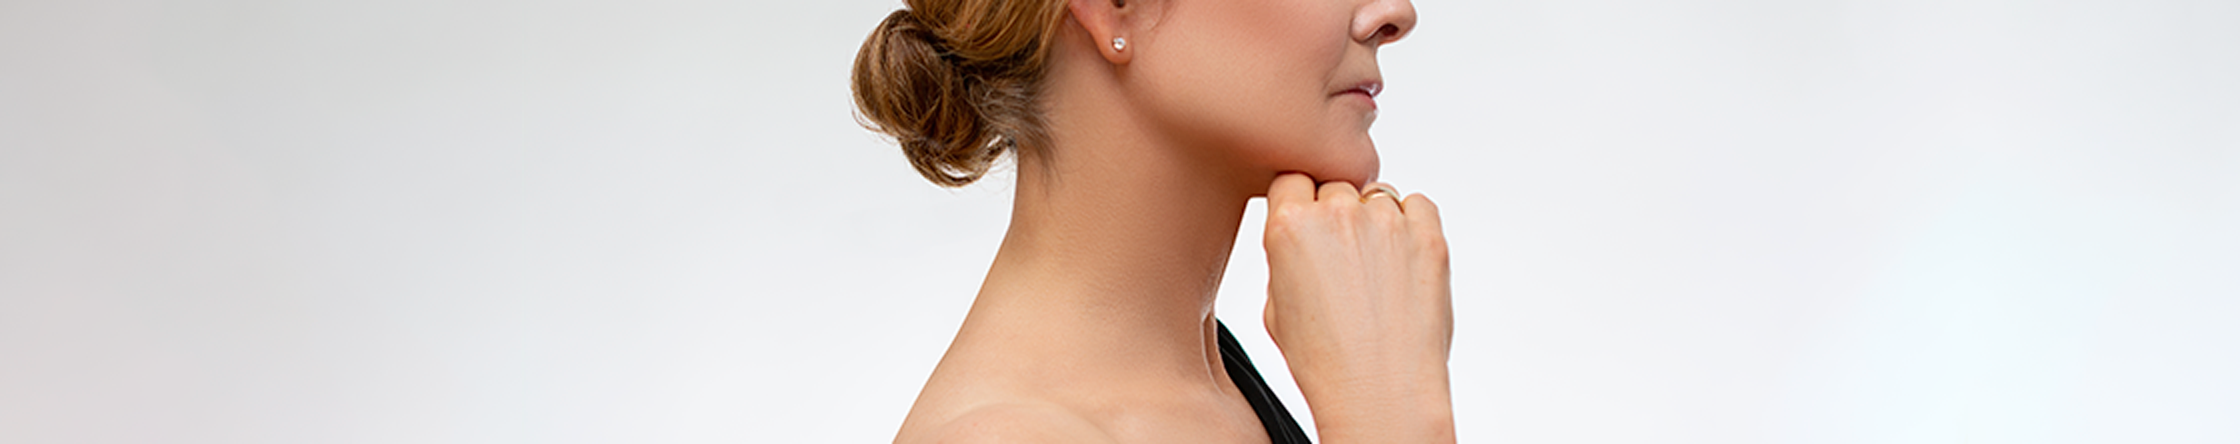 The truth about taking care of your neck skin